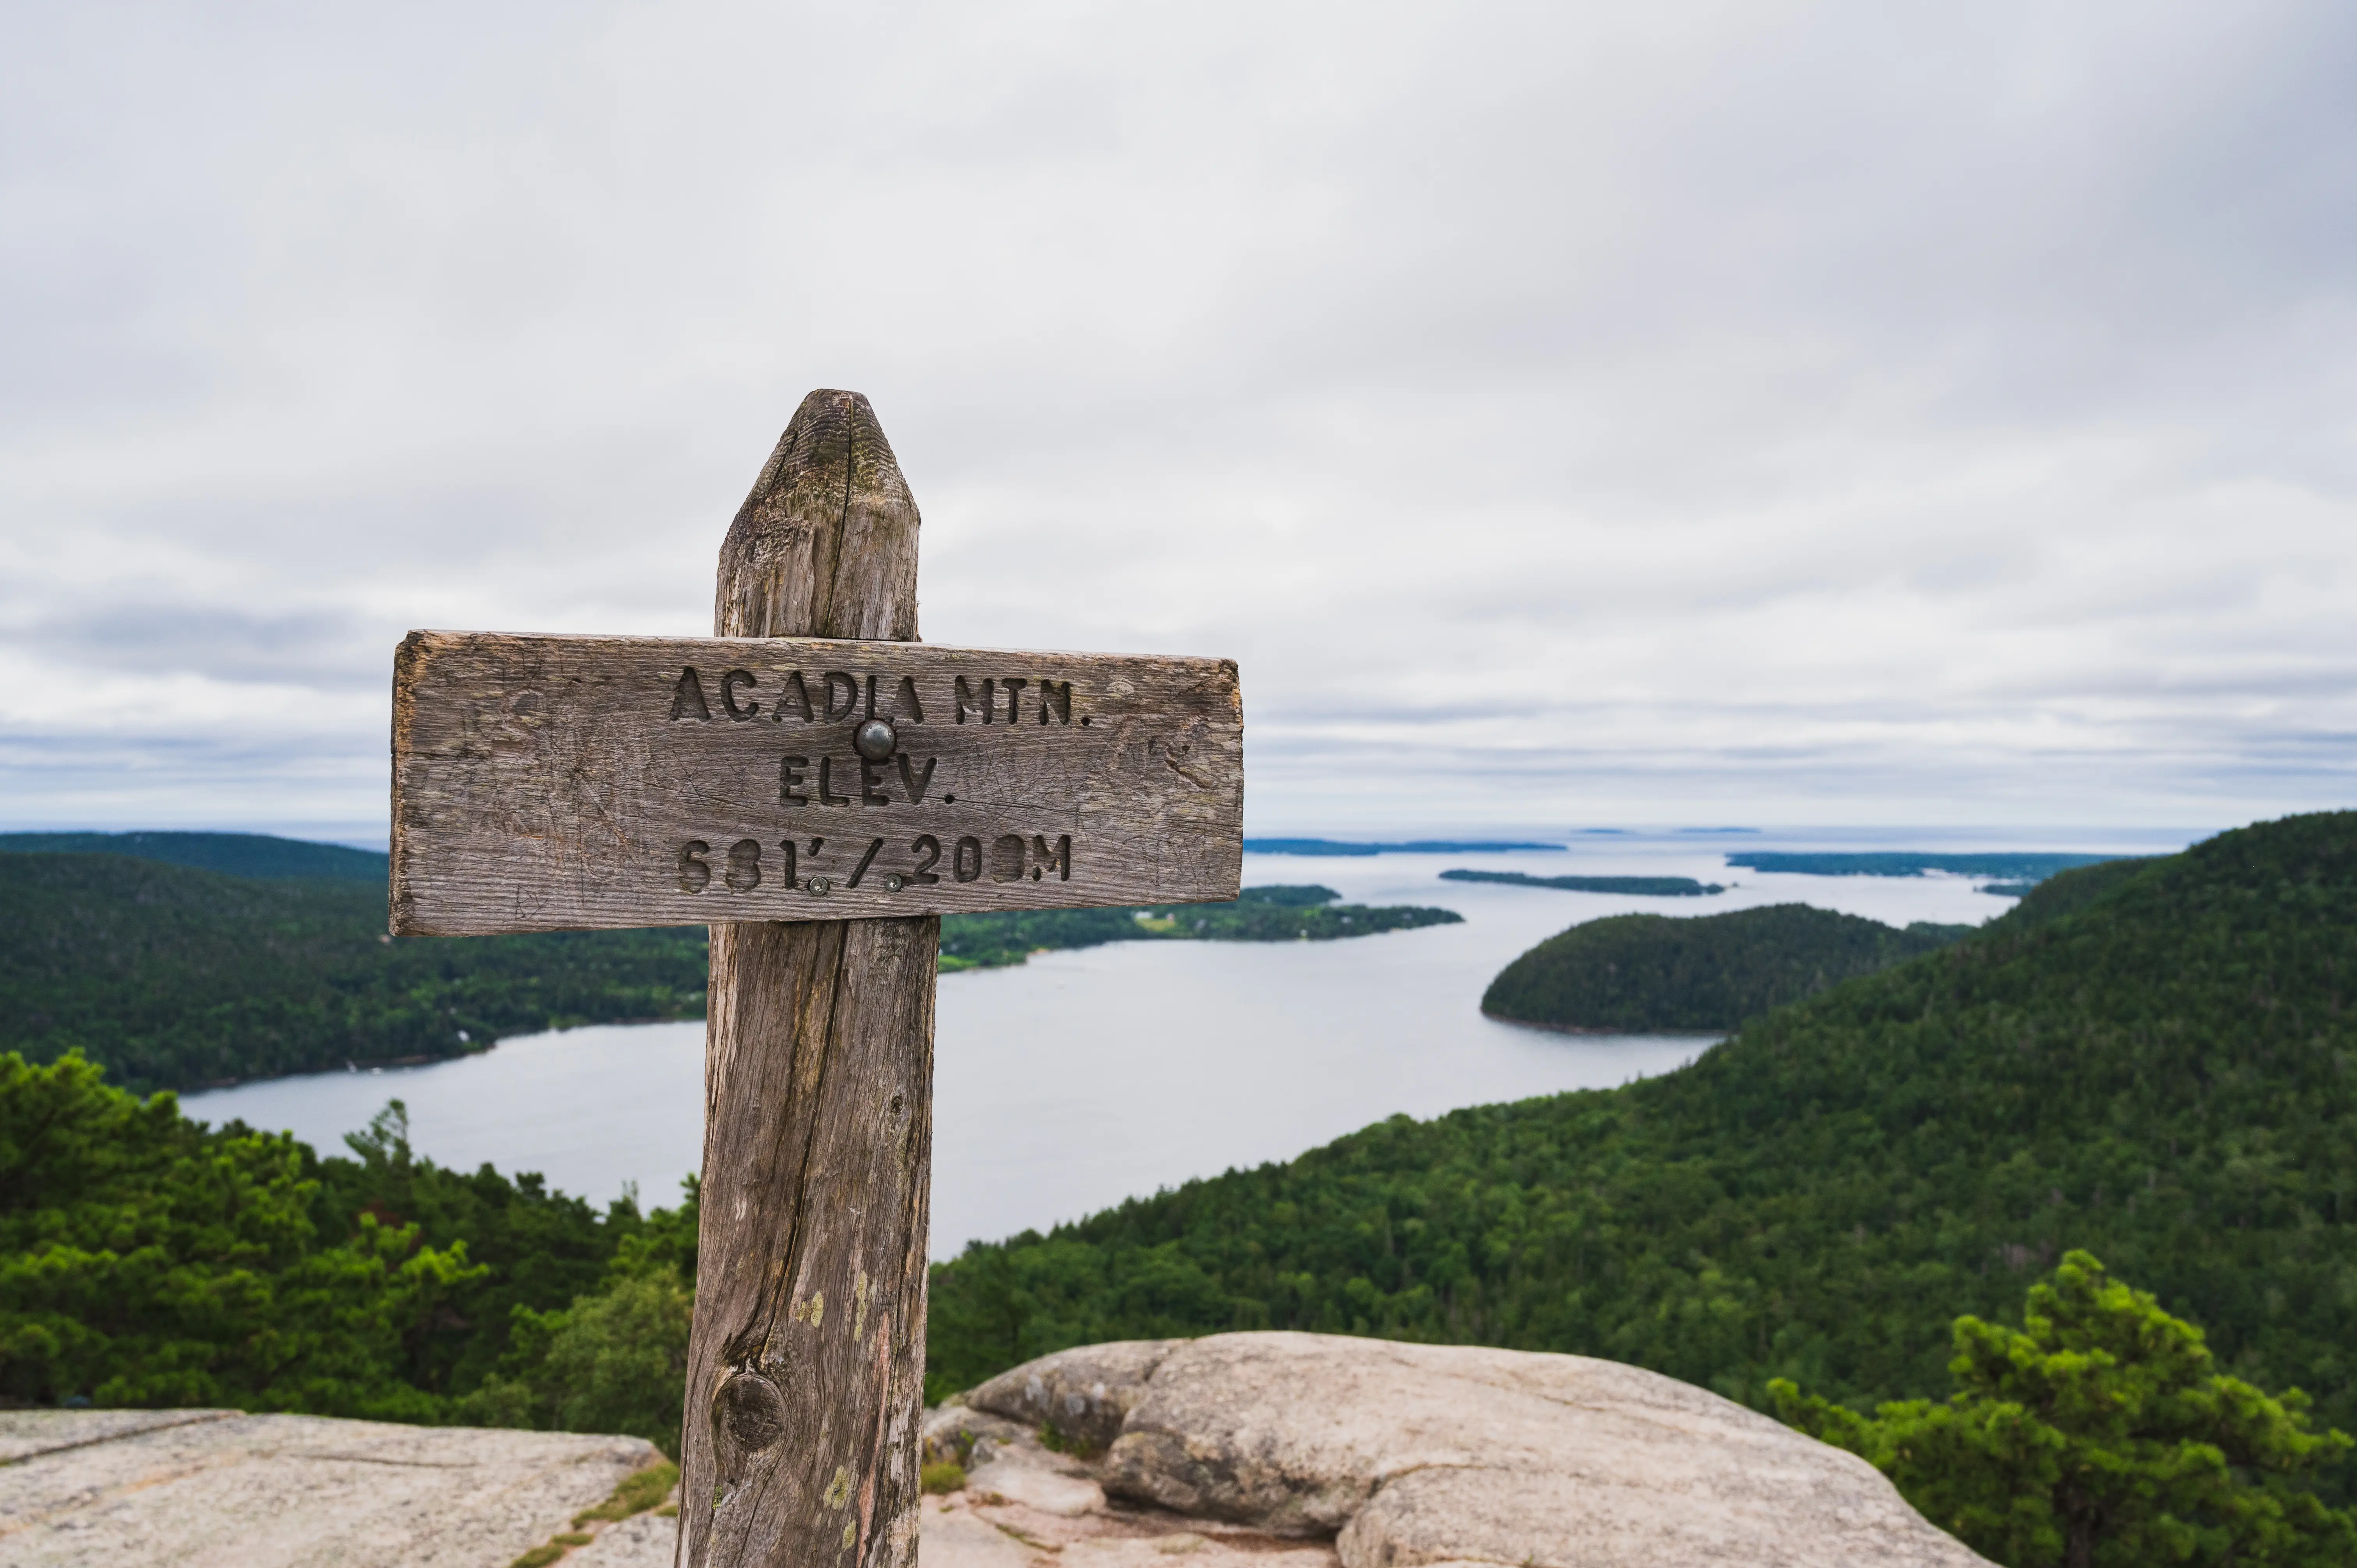 a wooden sign reads 'Acadia Mountain, Elevation 681 feet' while islands and trees flow out into the ocean beyond